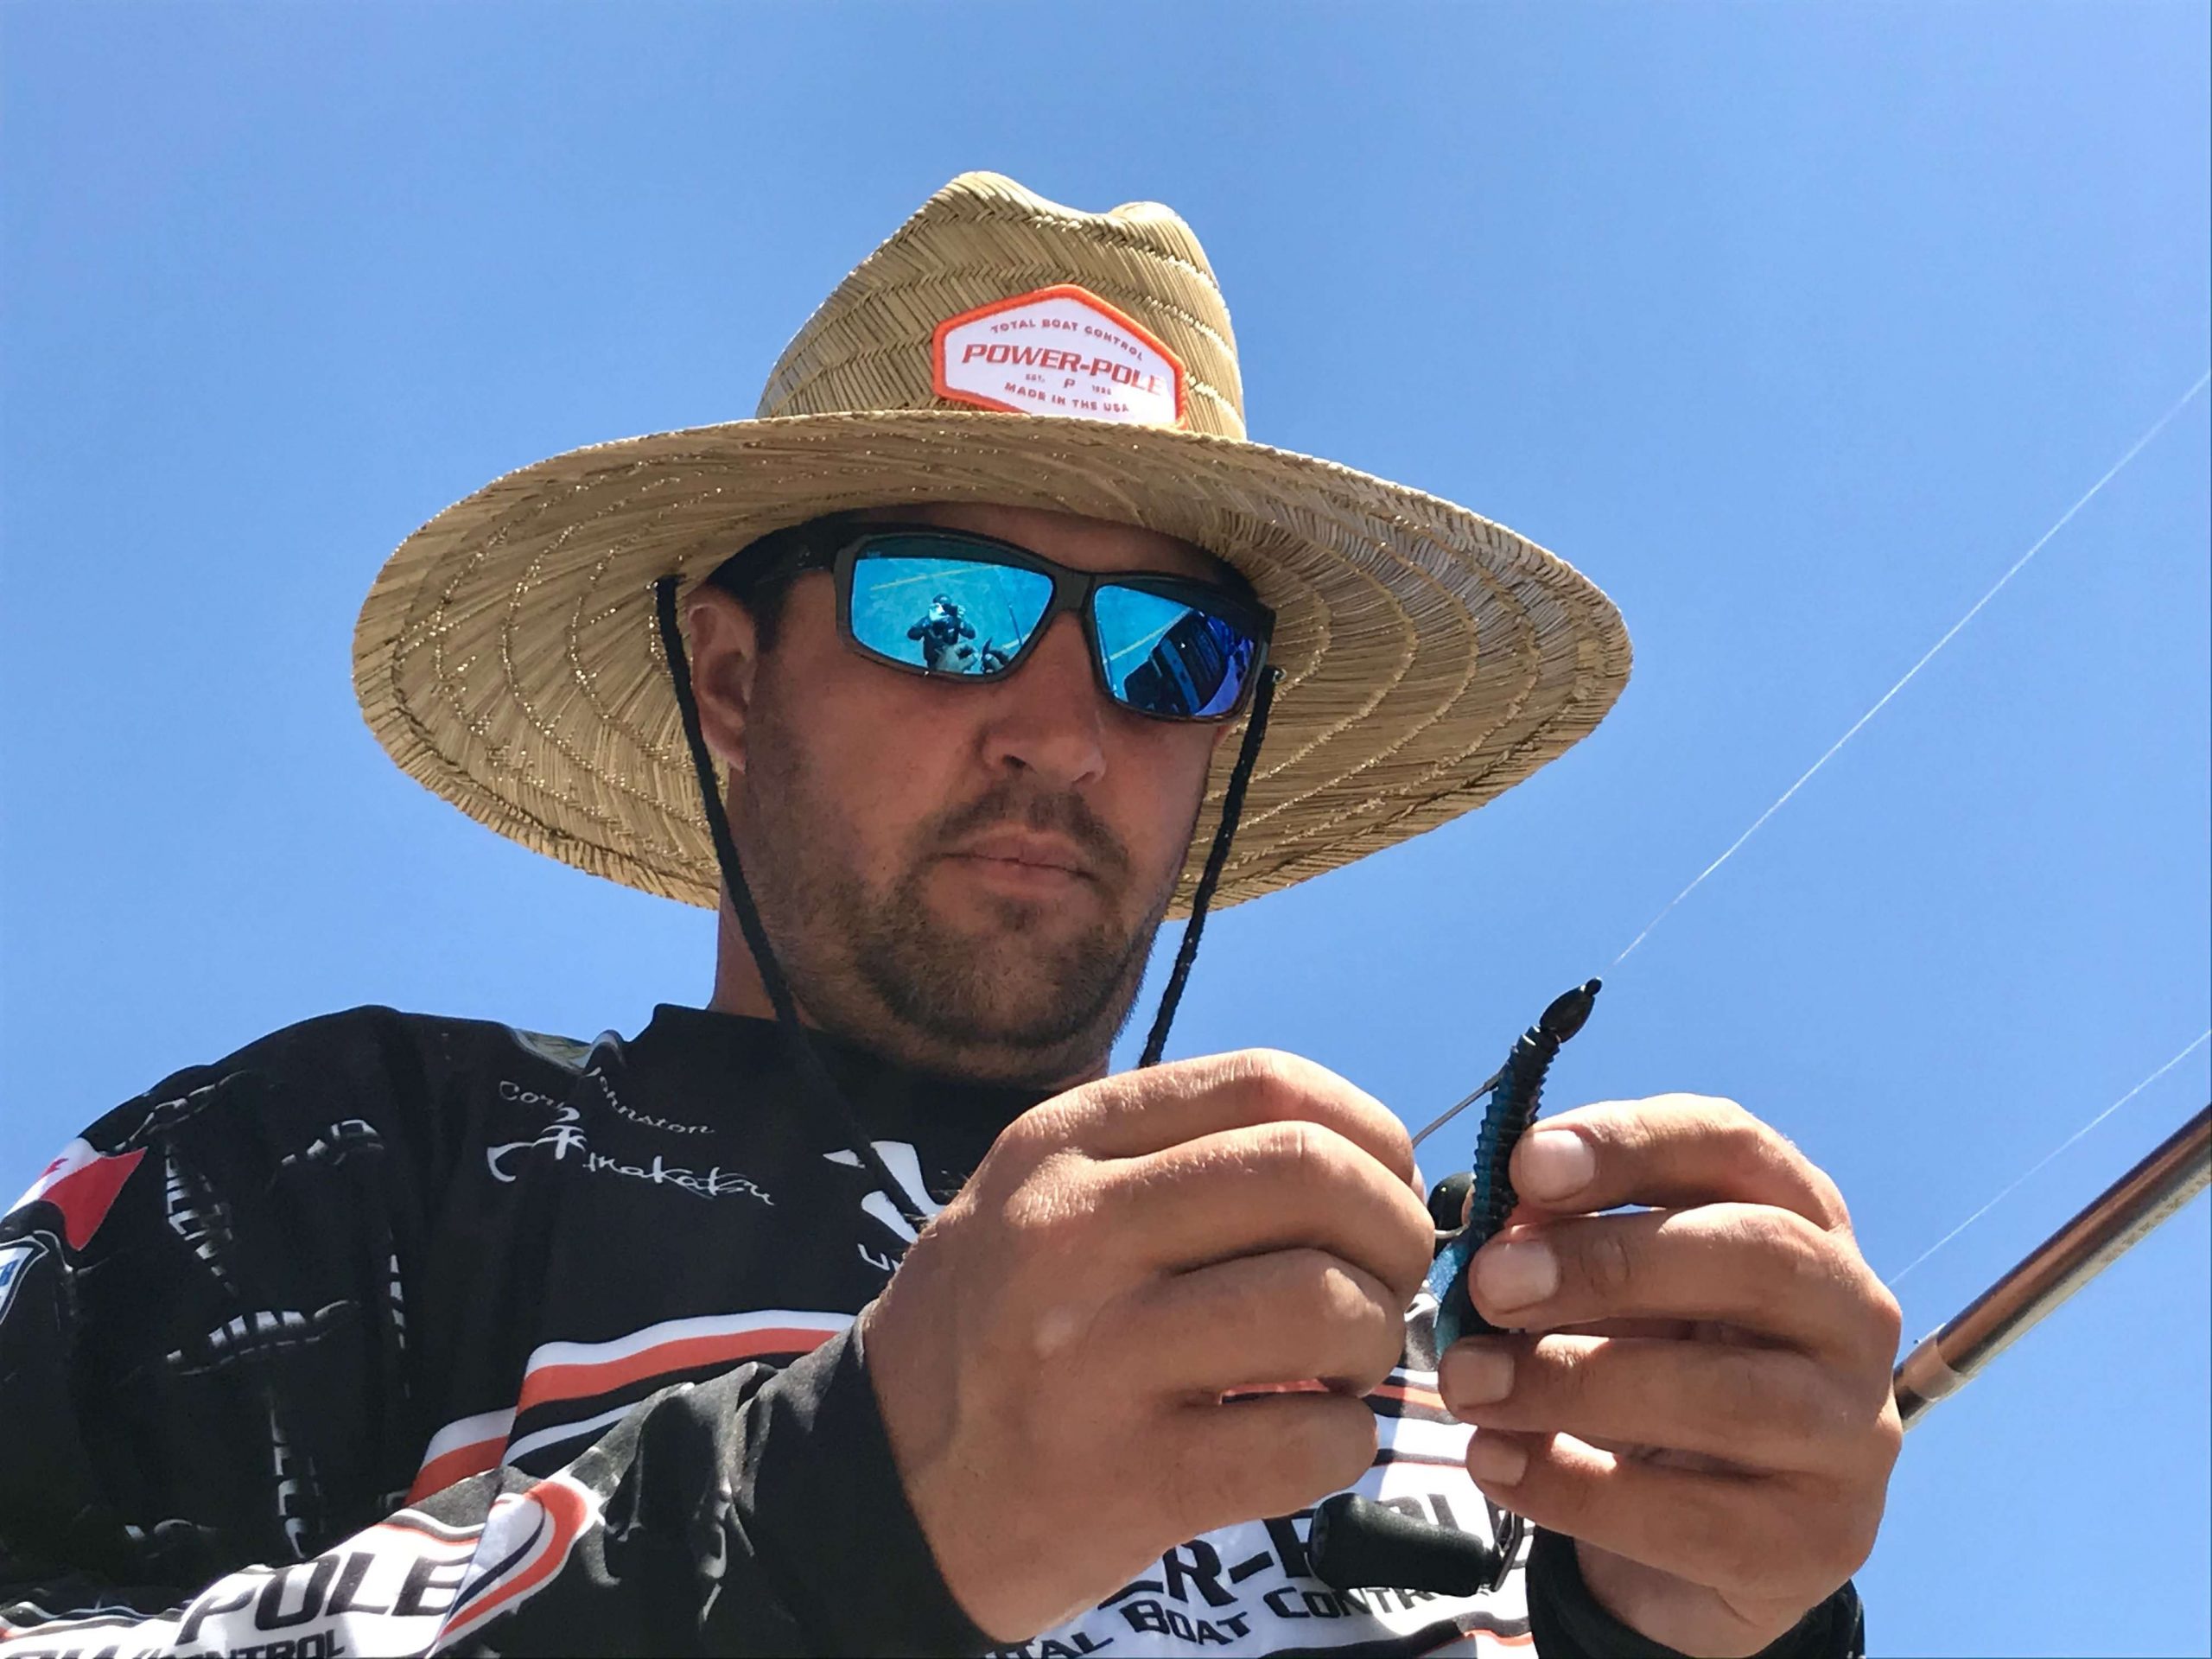 Not only does a wide brim hat aid in sight fishing, it also keeps the sun off Johnstonâs neck and offers an alternative to hooded sun shirts. A chin string allows him to snug the hat during windy days or when heâs running.
